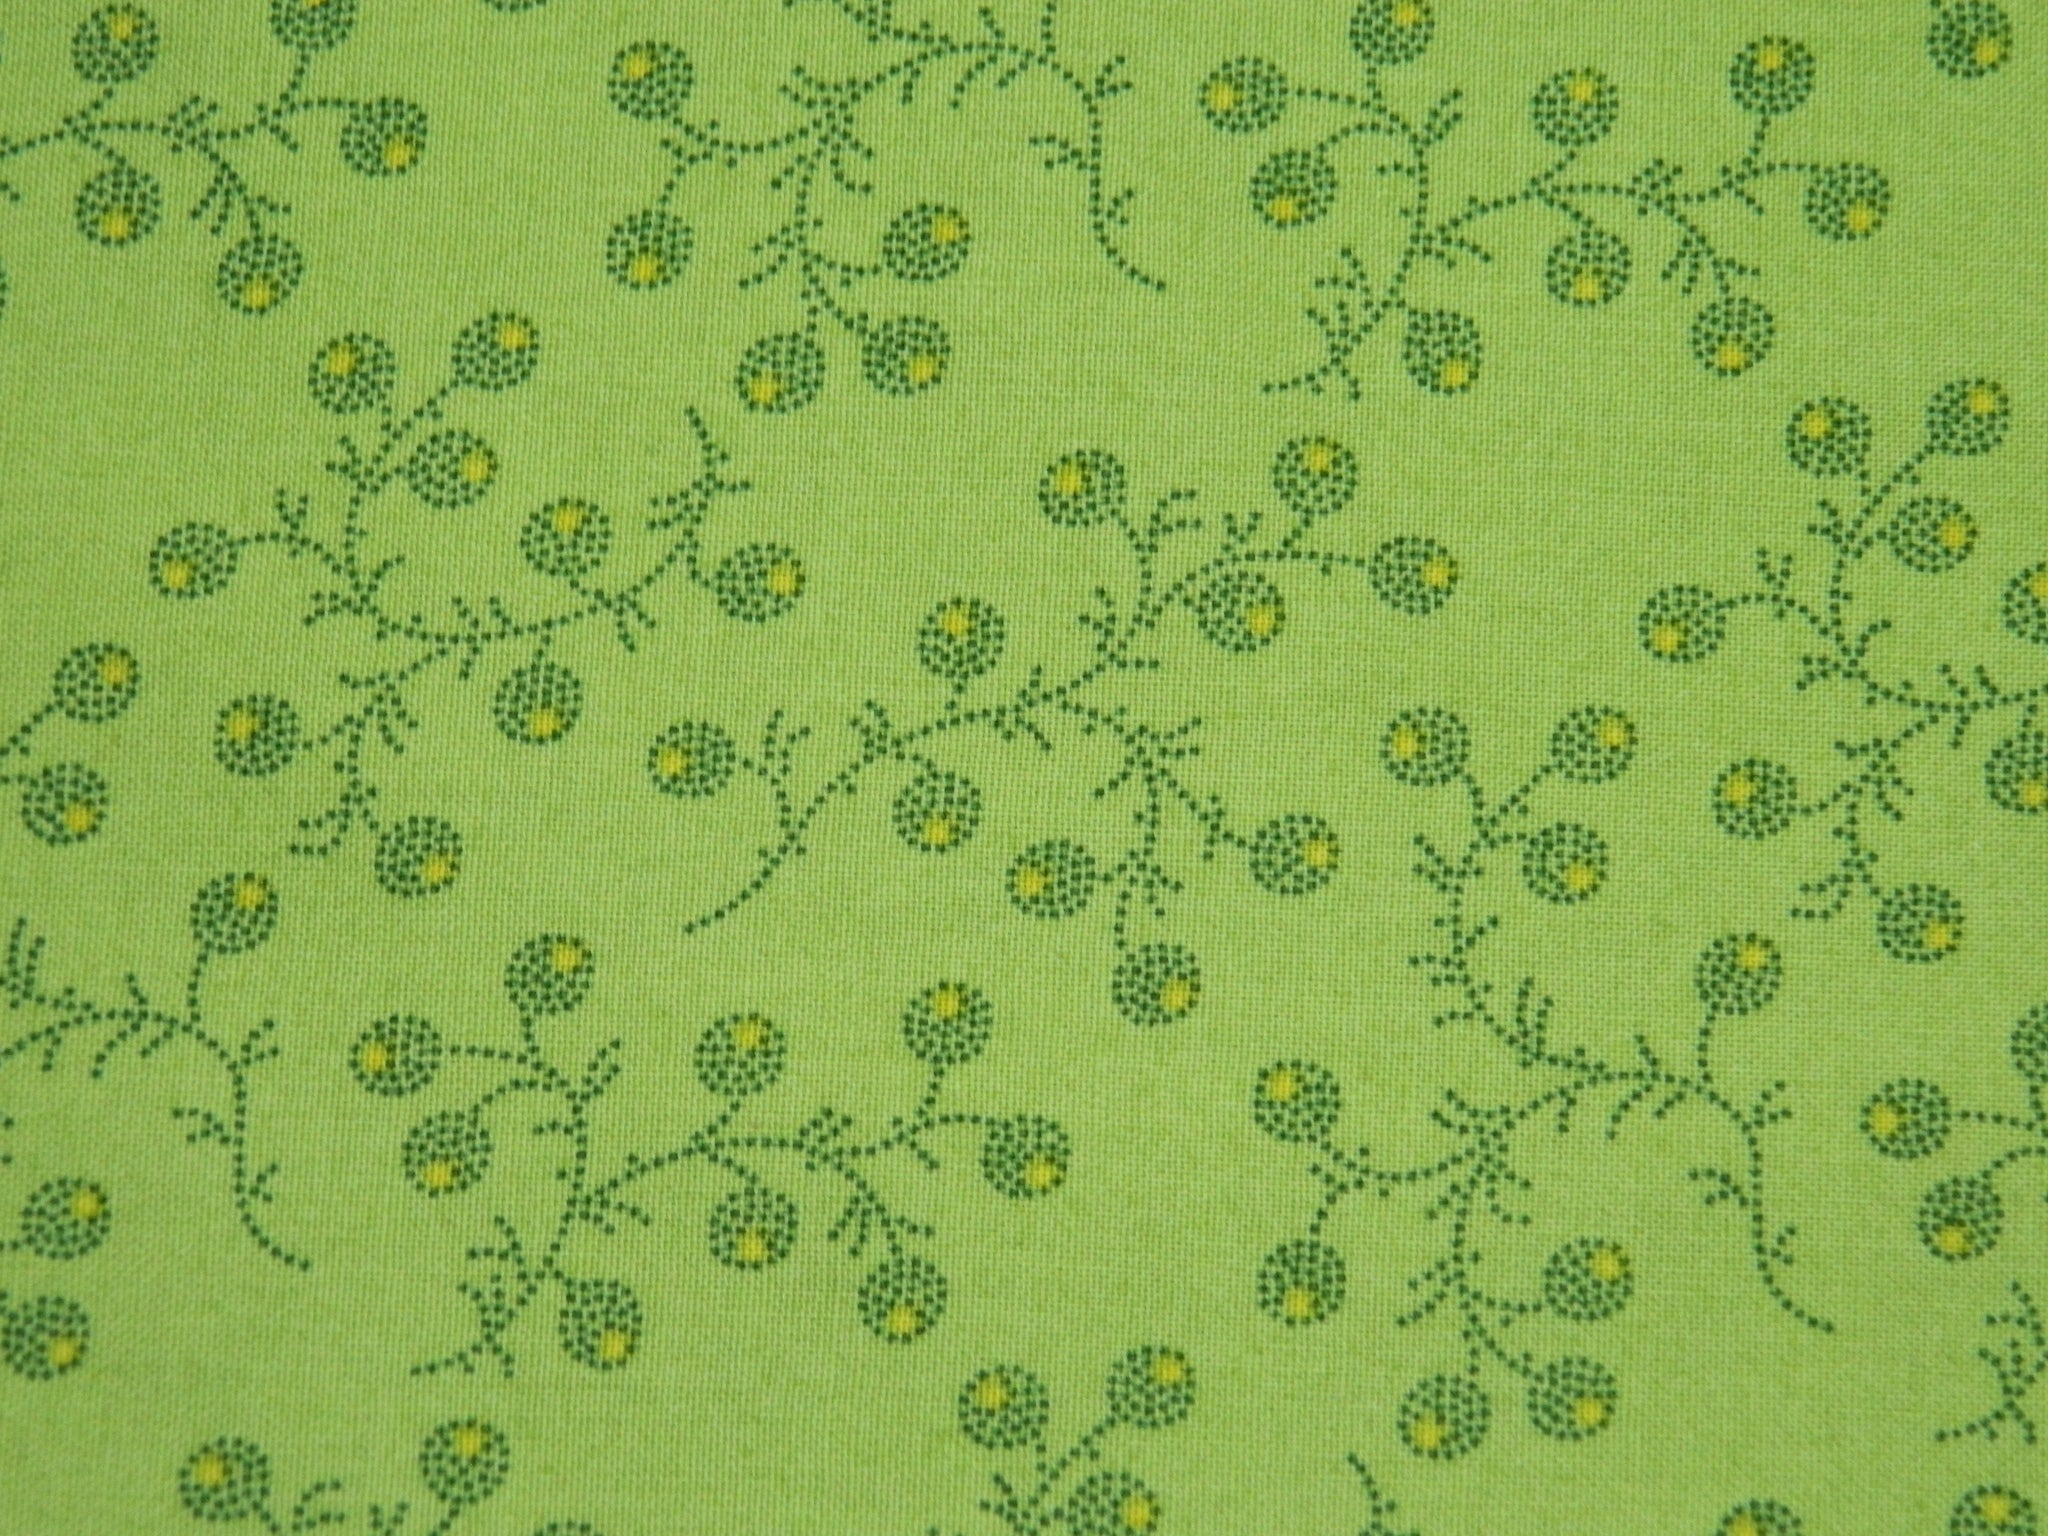 Green Floral Trinklets by Kathy Hall 9825